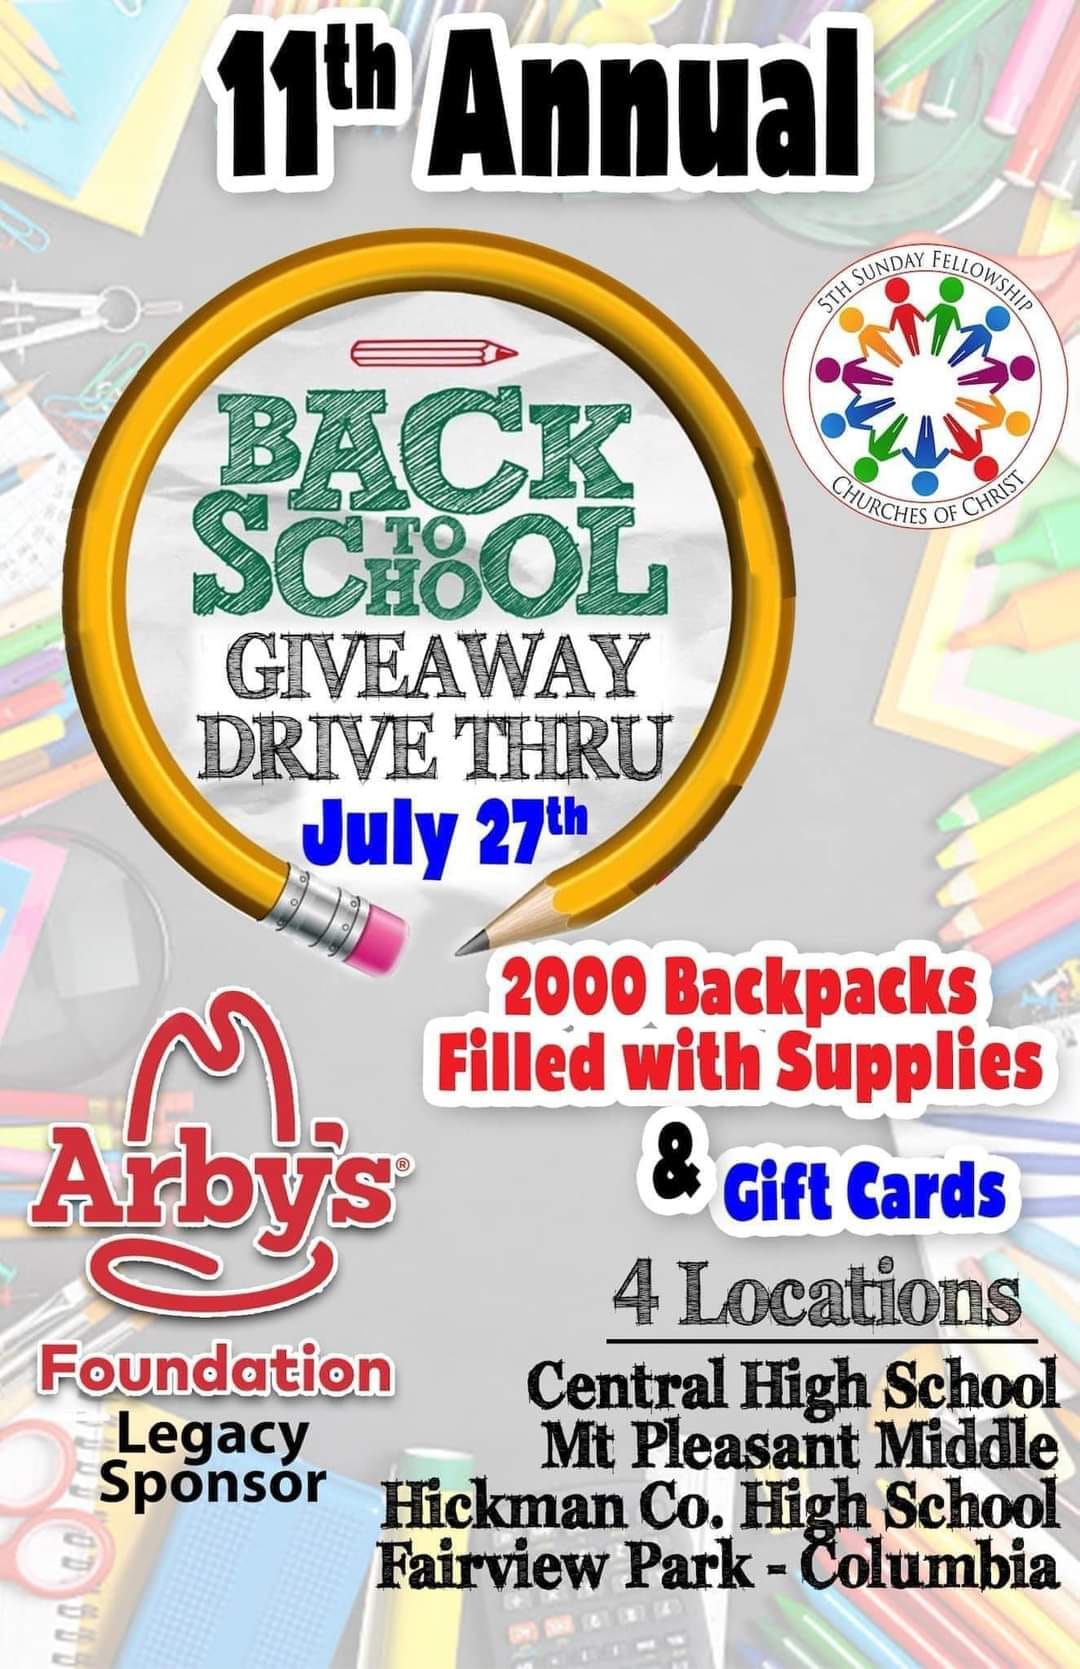 Arby's Back to School Give away